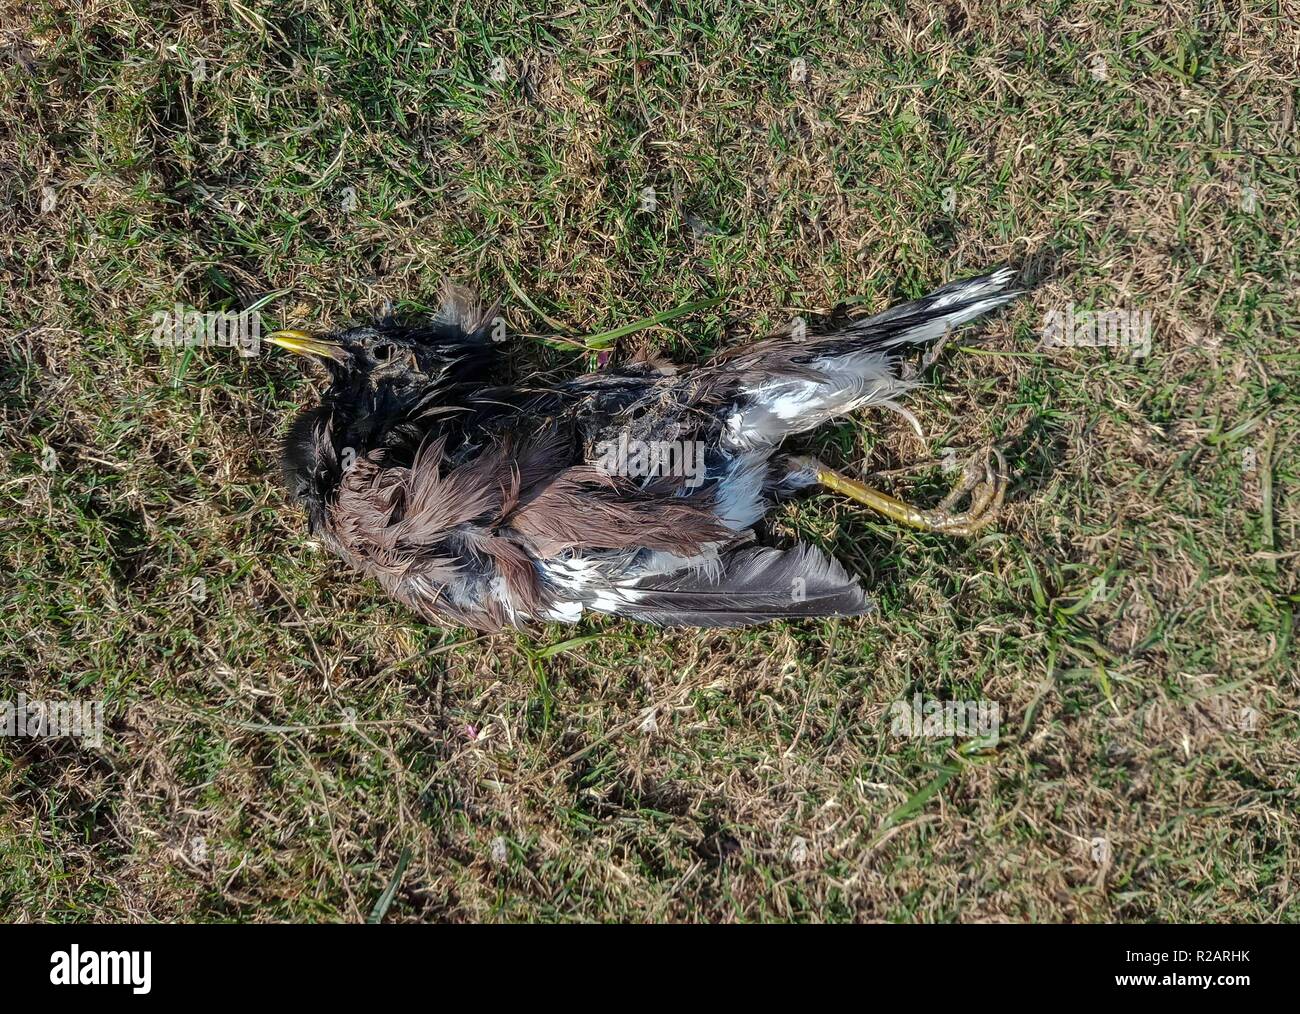 Chandigarh, Punjab, India. 18th Nov, 2018. A dead bird seen lying on the  ground in  is a city and a union territory in India  that serves as the capital of the